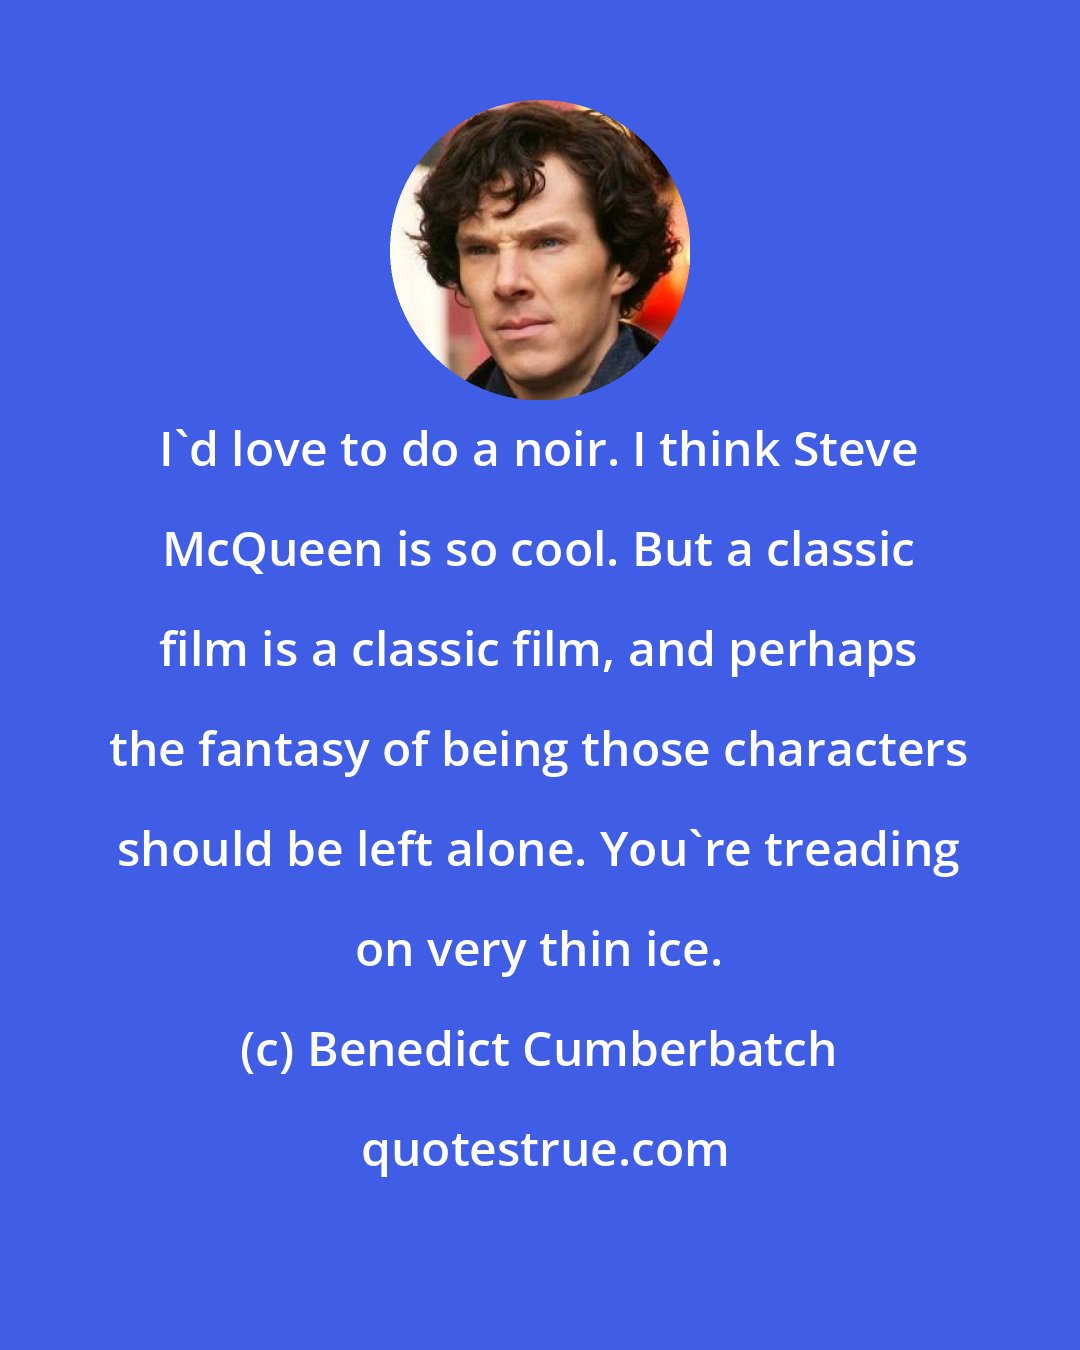 Benedict Cumberbatch: I'd love to do a noir. I think Steve McQueen is so cool. But a classic film is a classic film, and perhaps the fantasy of being those characters should be left alone. You're treading on very thin ice.